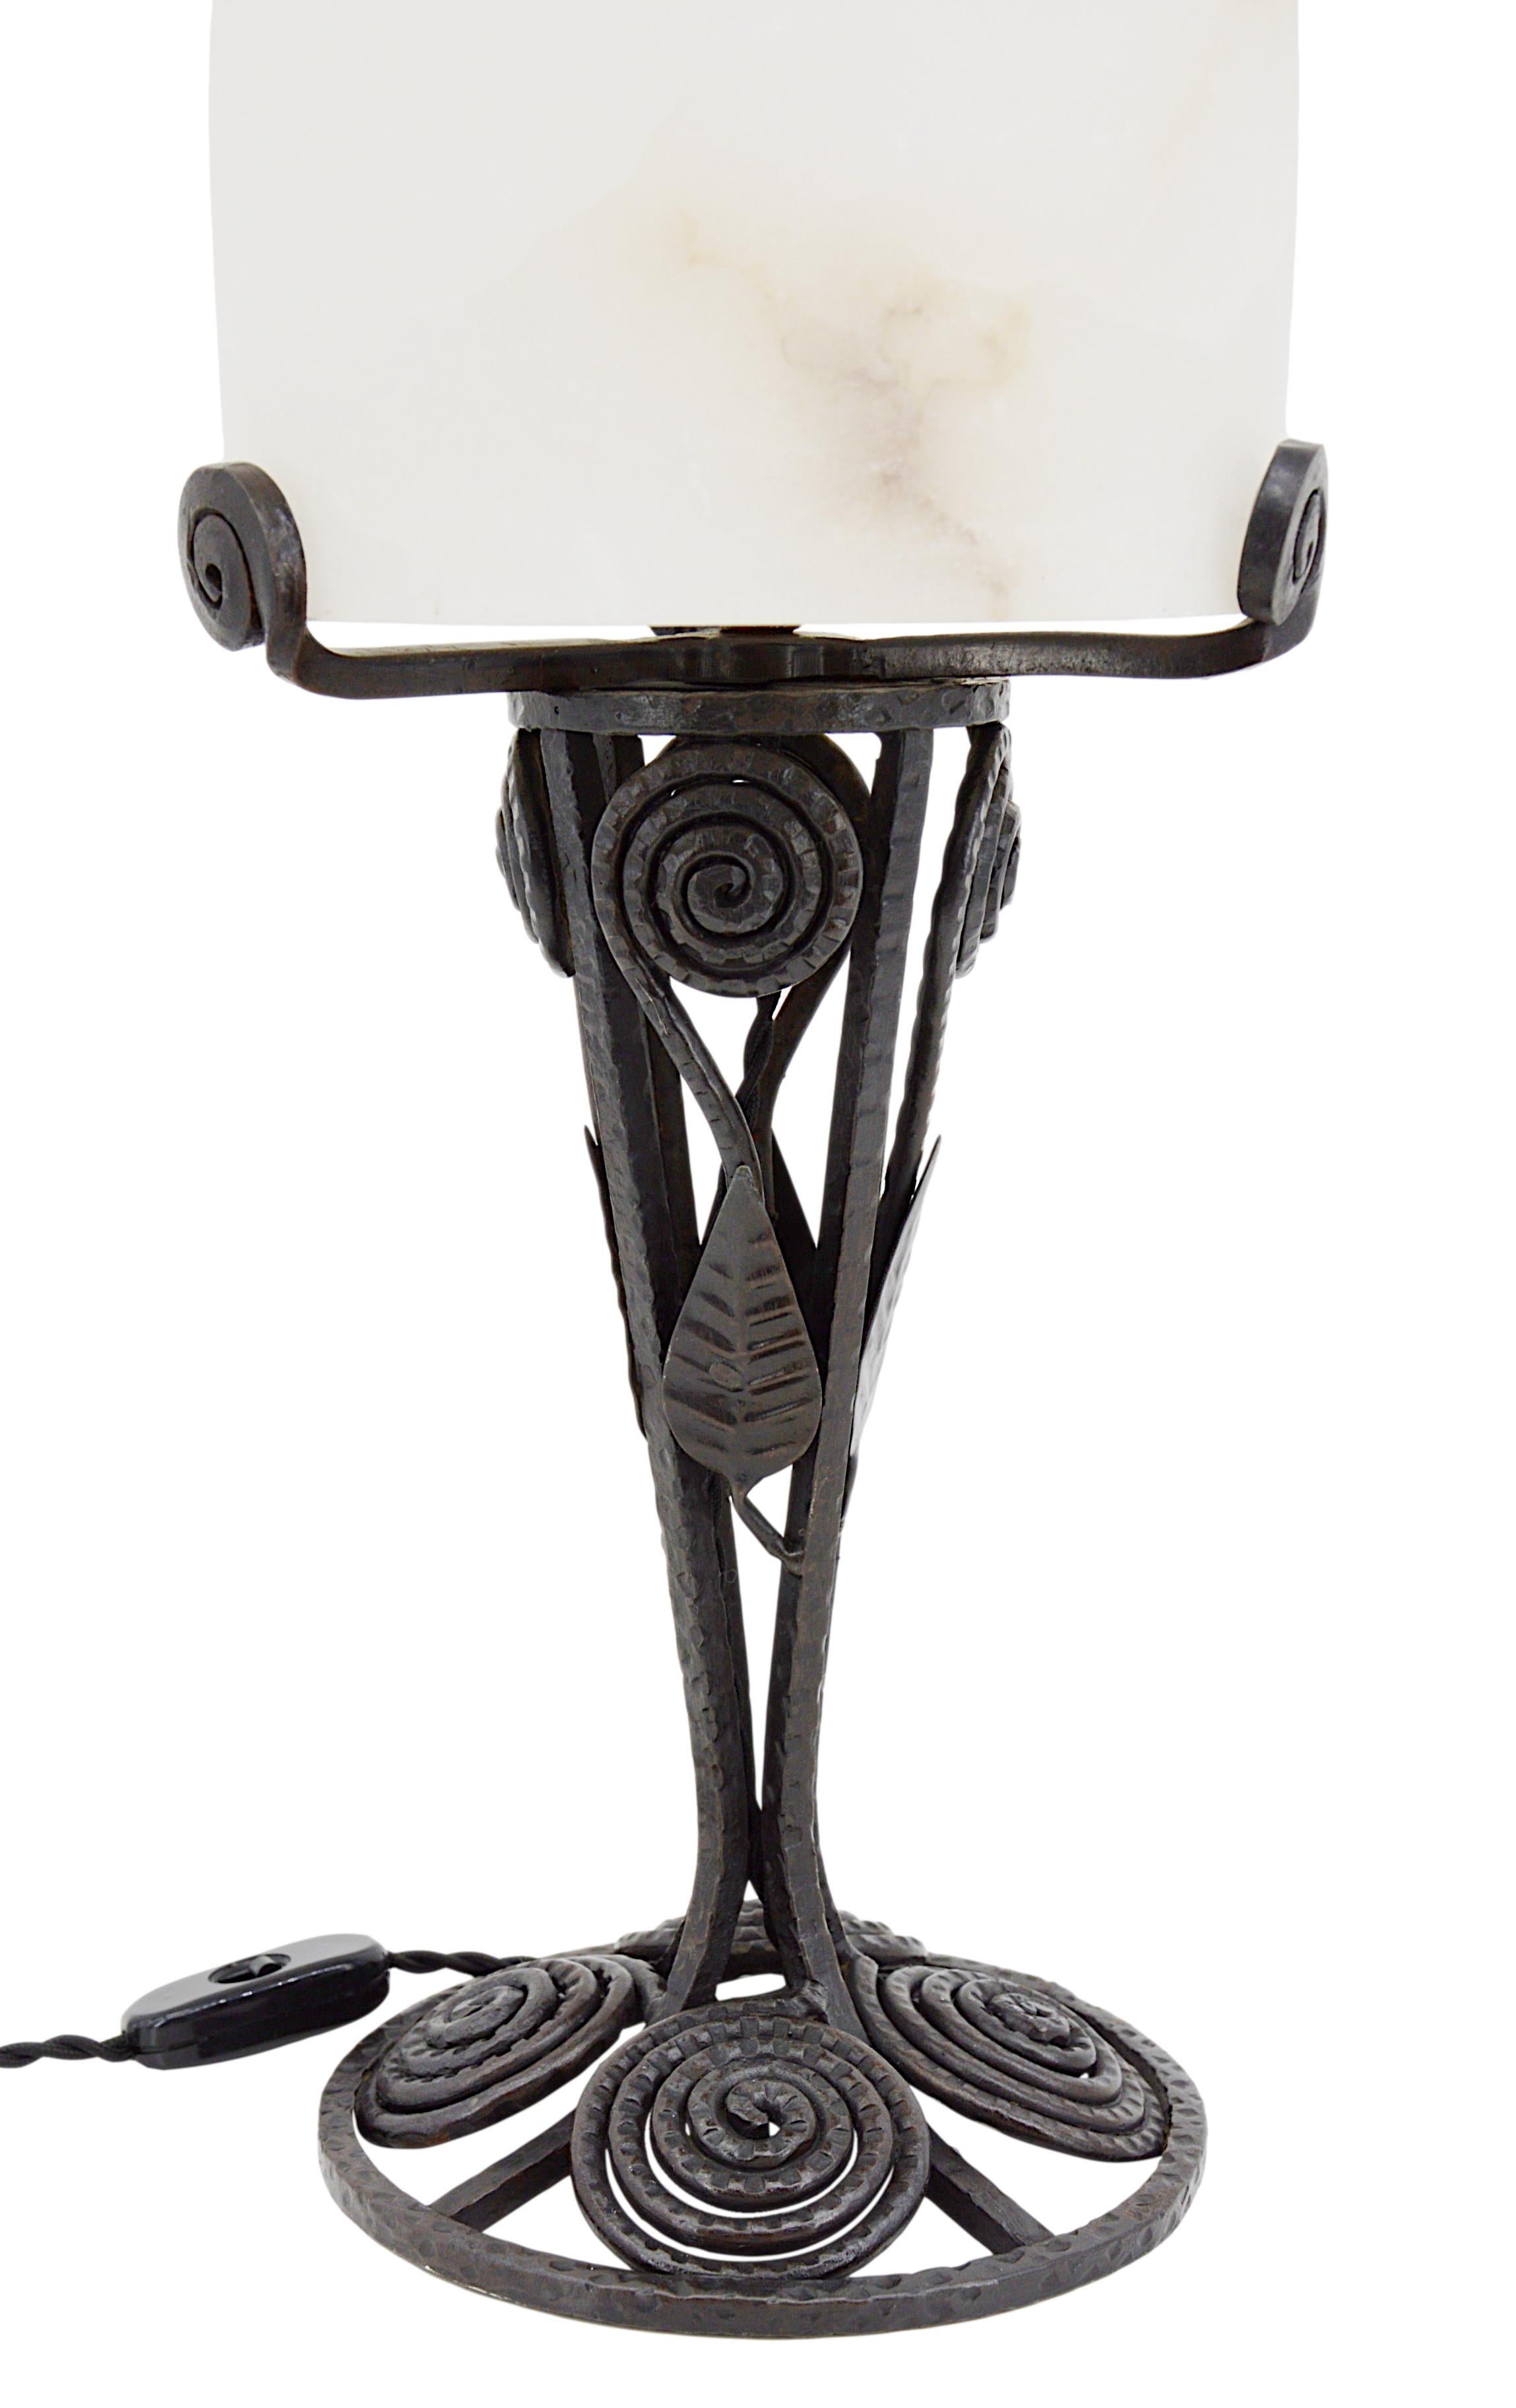 French Art Deco alabaster table lamp, France, 1920s. Thick alabaster shade on its wrought-iron base. Old alabaster cannot be compared to new ones. Old alabaster has veins. Sometimes they can be mistaken for cracks. But they are not cracks, they are